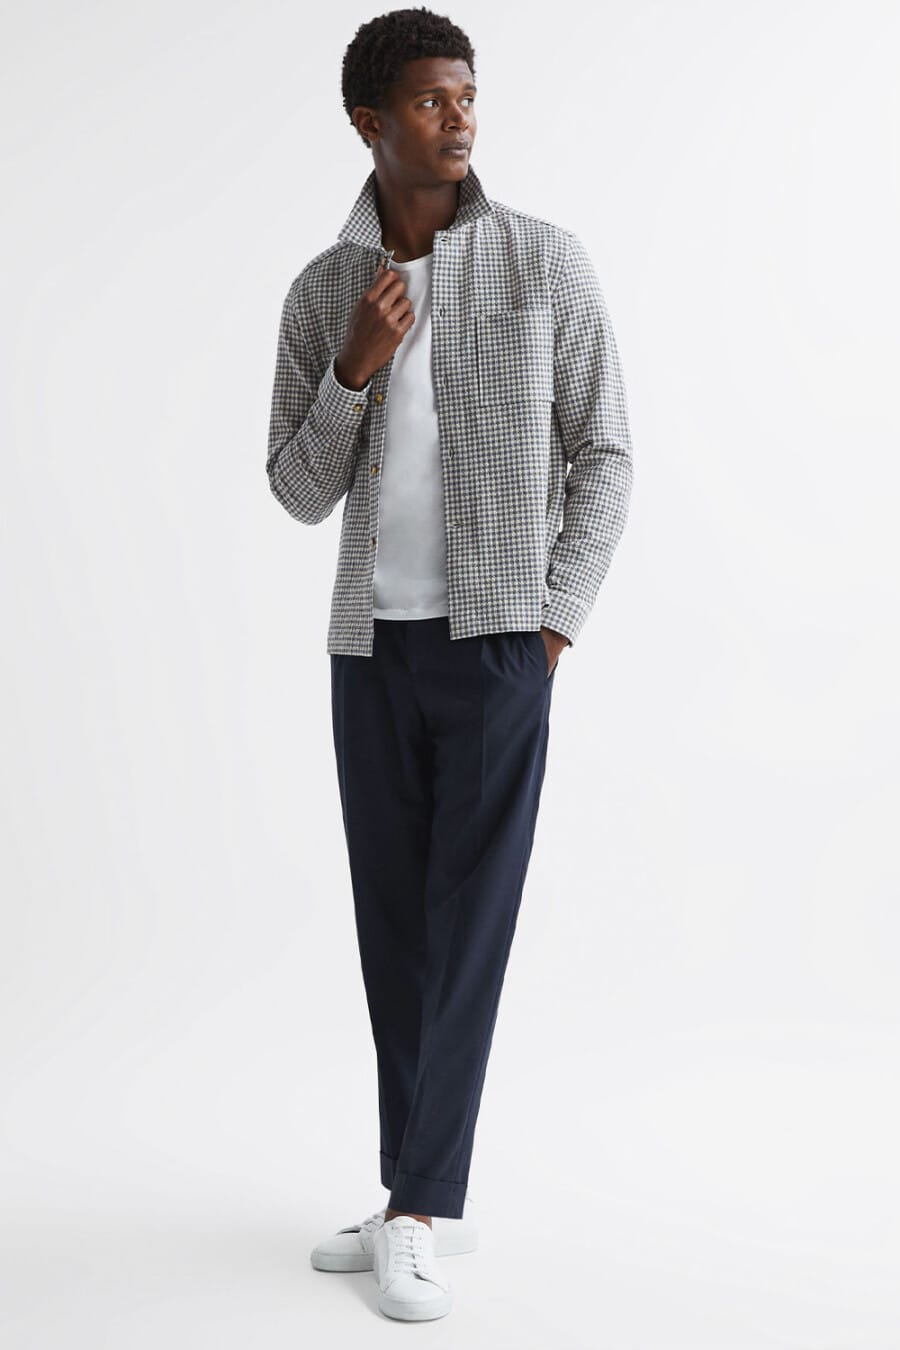 Men's navy pants, white T-shirt, grey houndstooth shacket and white sneakers worn sockless outfit